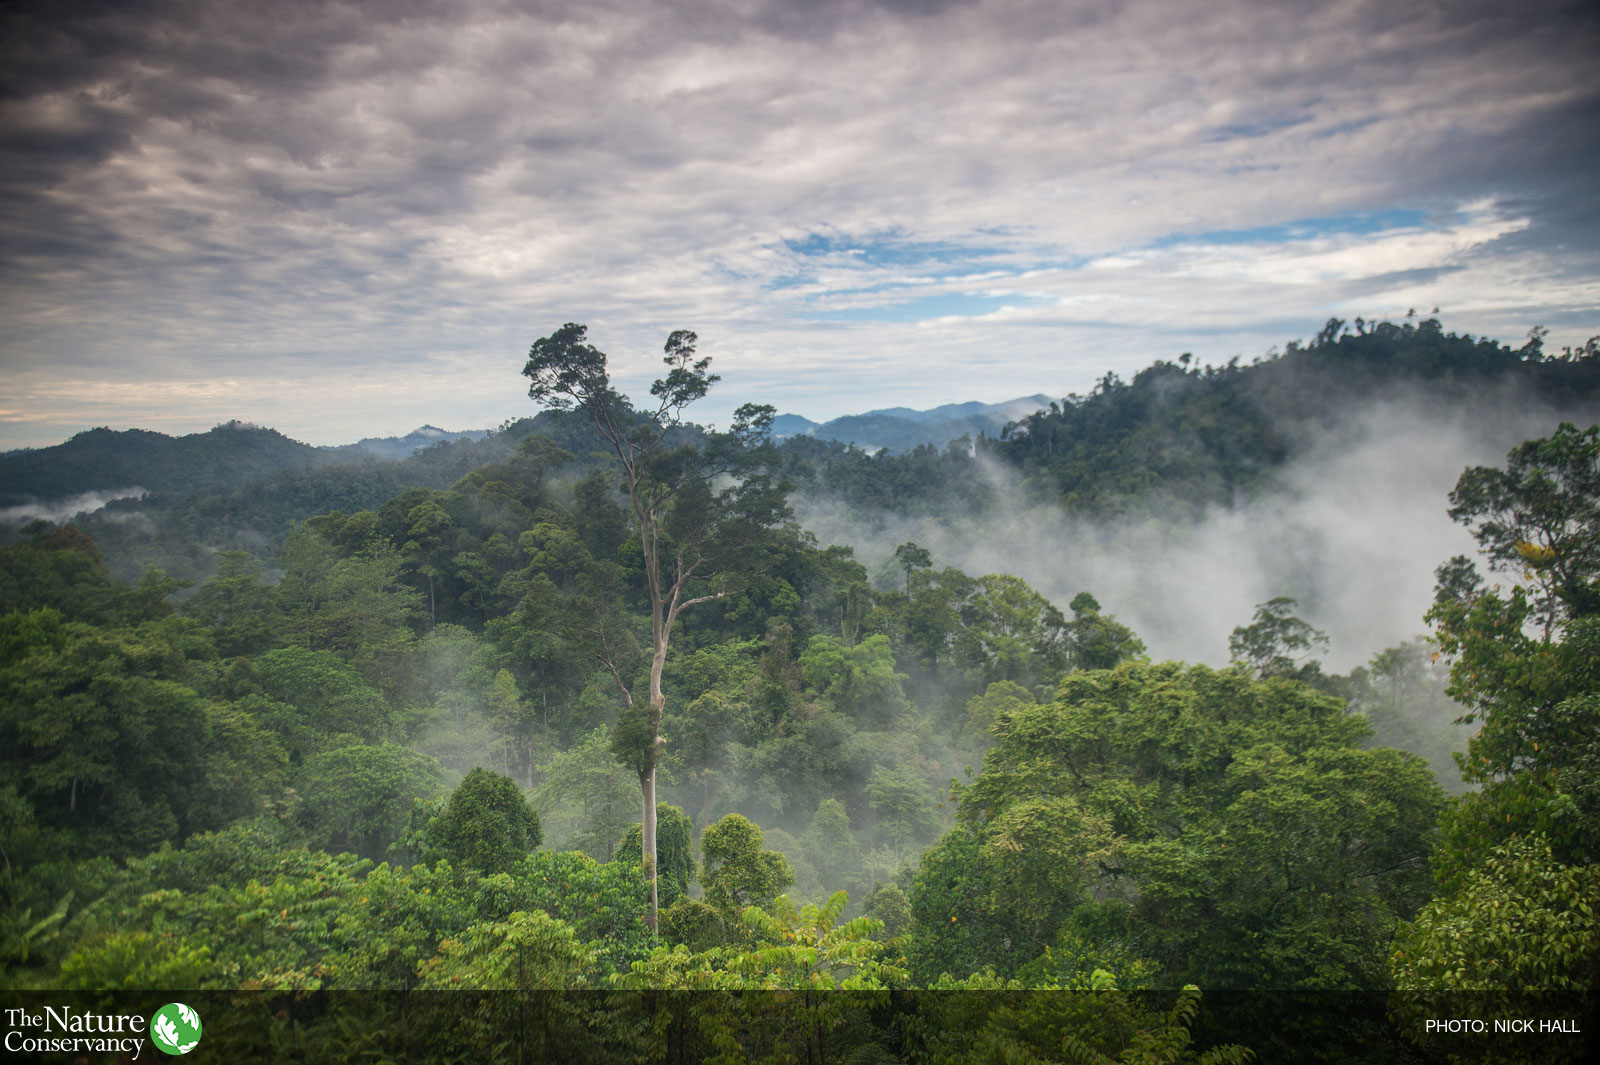 The Nature Conservancy's conservation initiatives in East Kalimantan, Indonesia. Photo ©Nick Hall for TNC